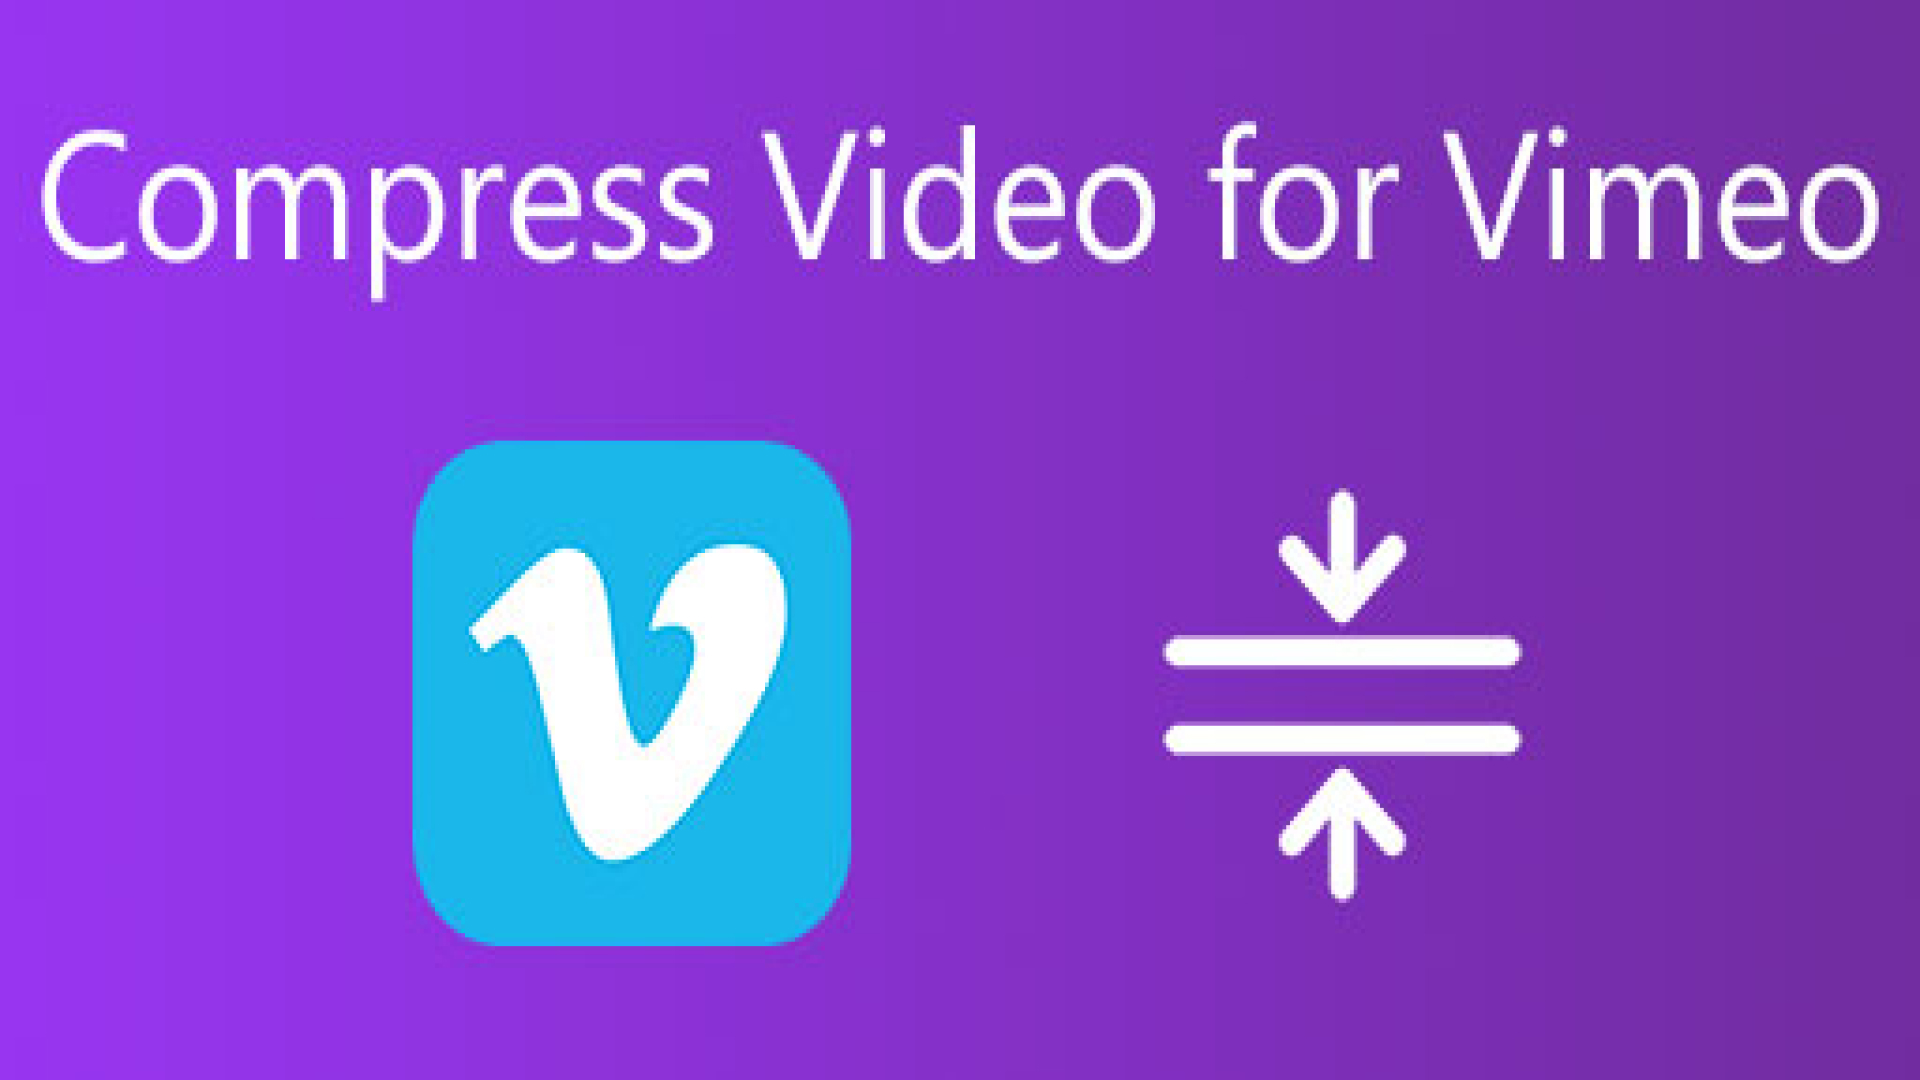 Guide to Compress Video for Vimeo